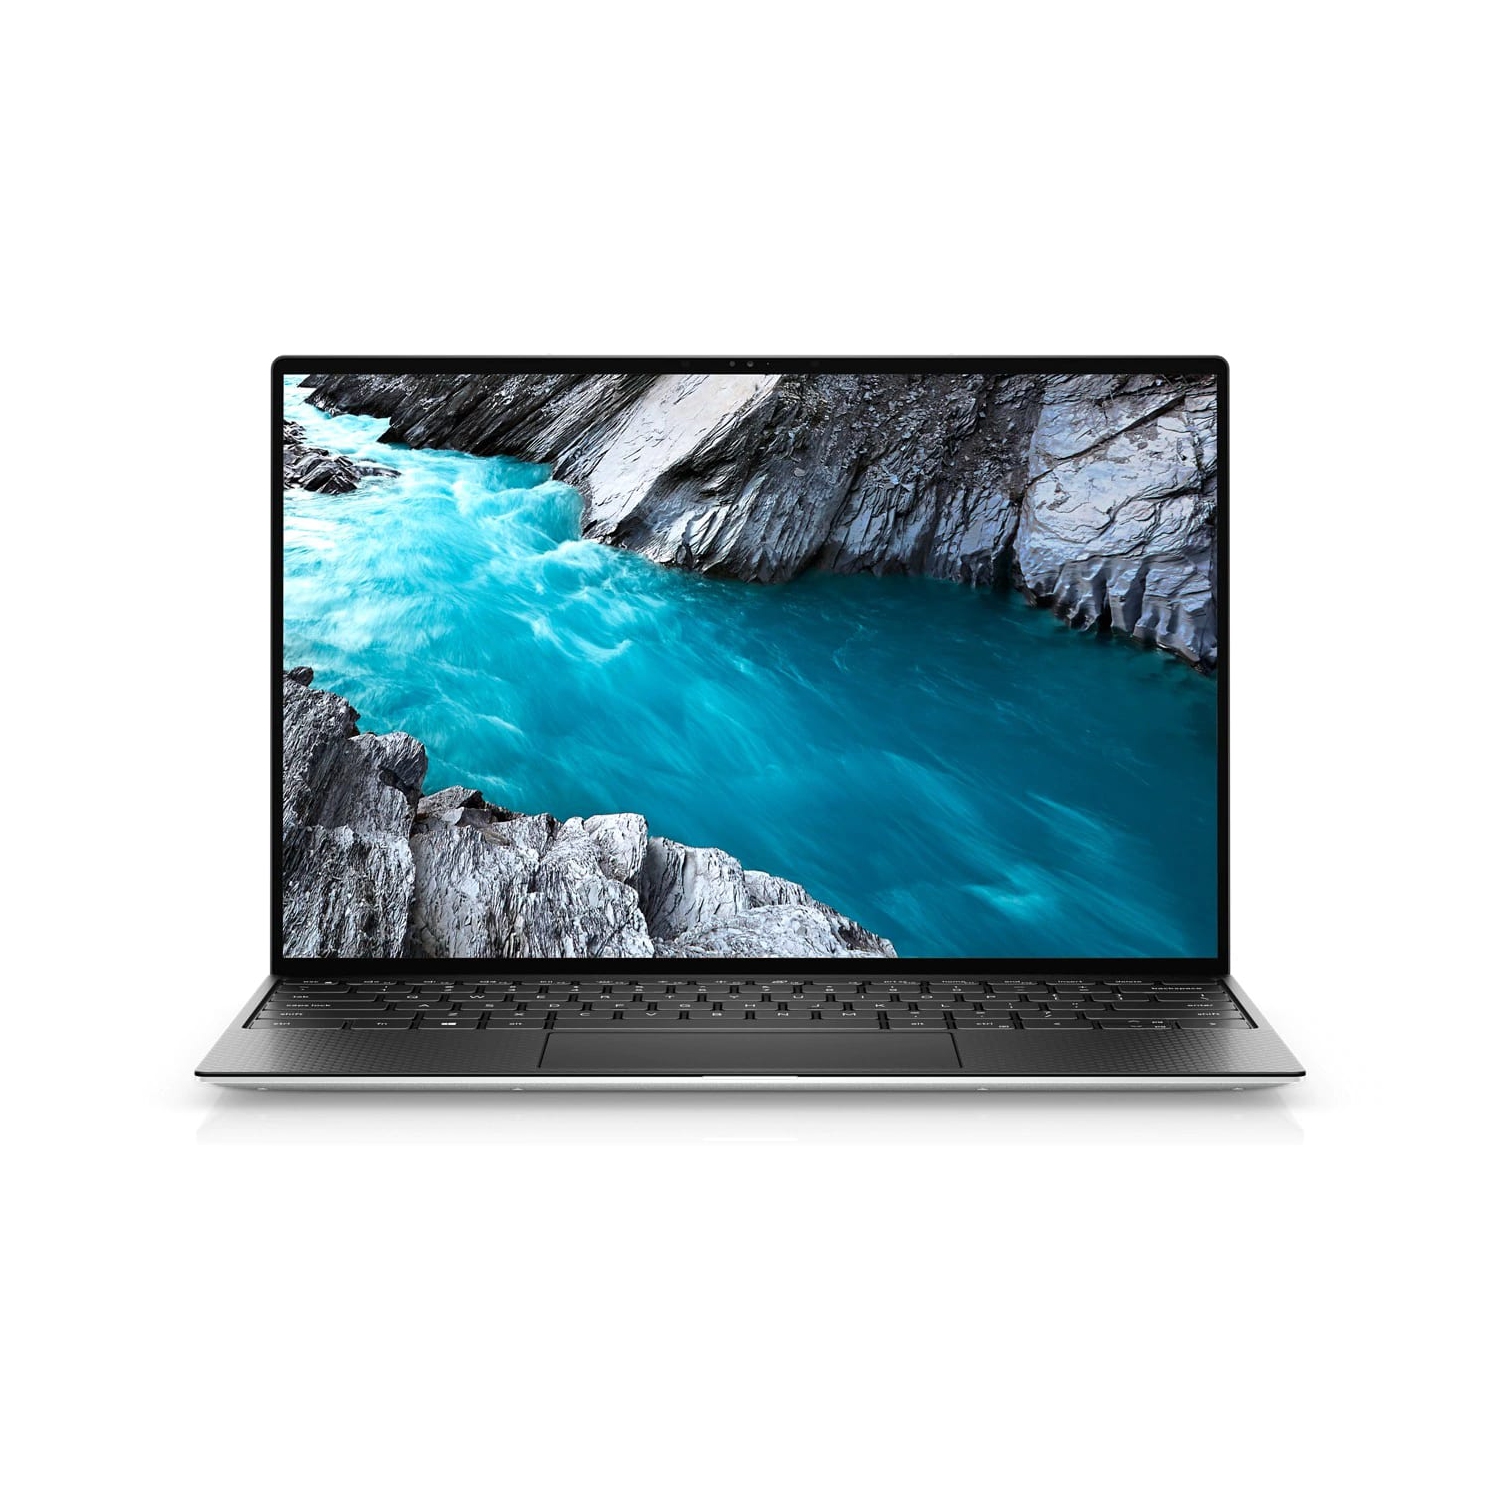 Refurbished (Excellent) - Dell XPS 13 9310 Laptop (2020) | 13.4" FHD+ | Core i7 - 512GB SSD - 32GB RAM | 4 Cores @ 5 GHz - 11th Gen CPU Certified Refurbished